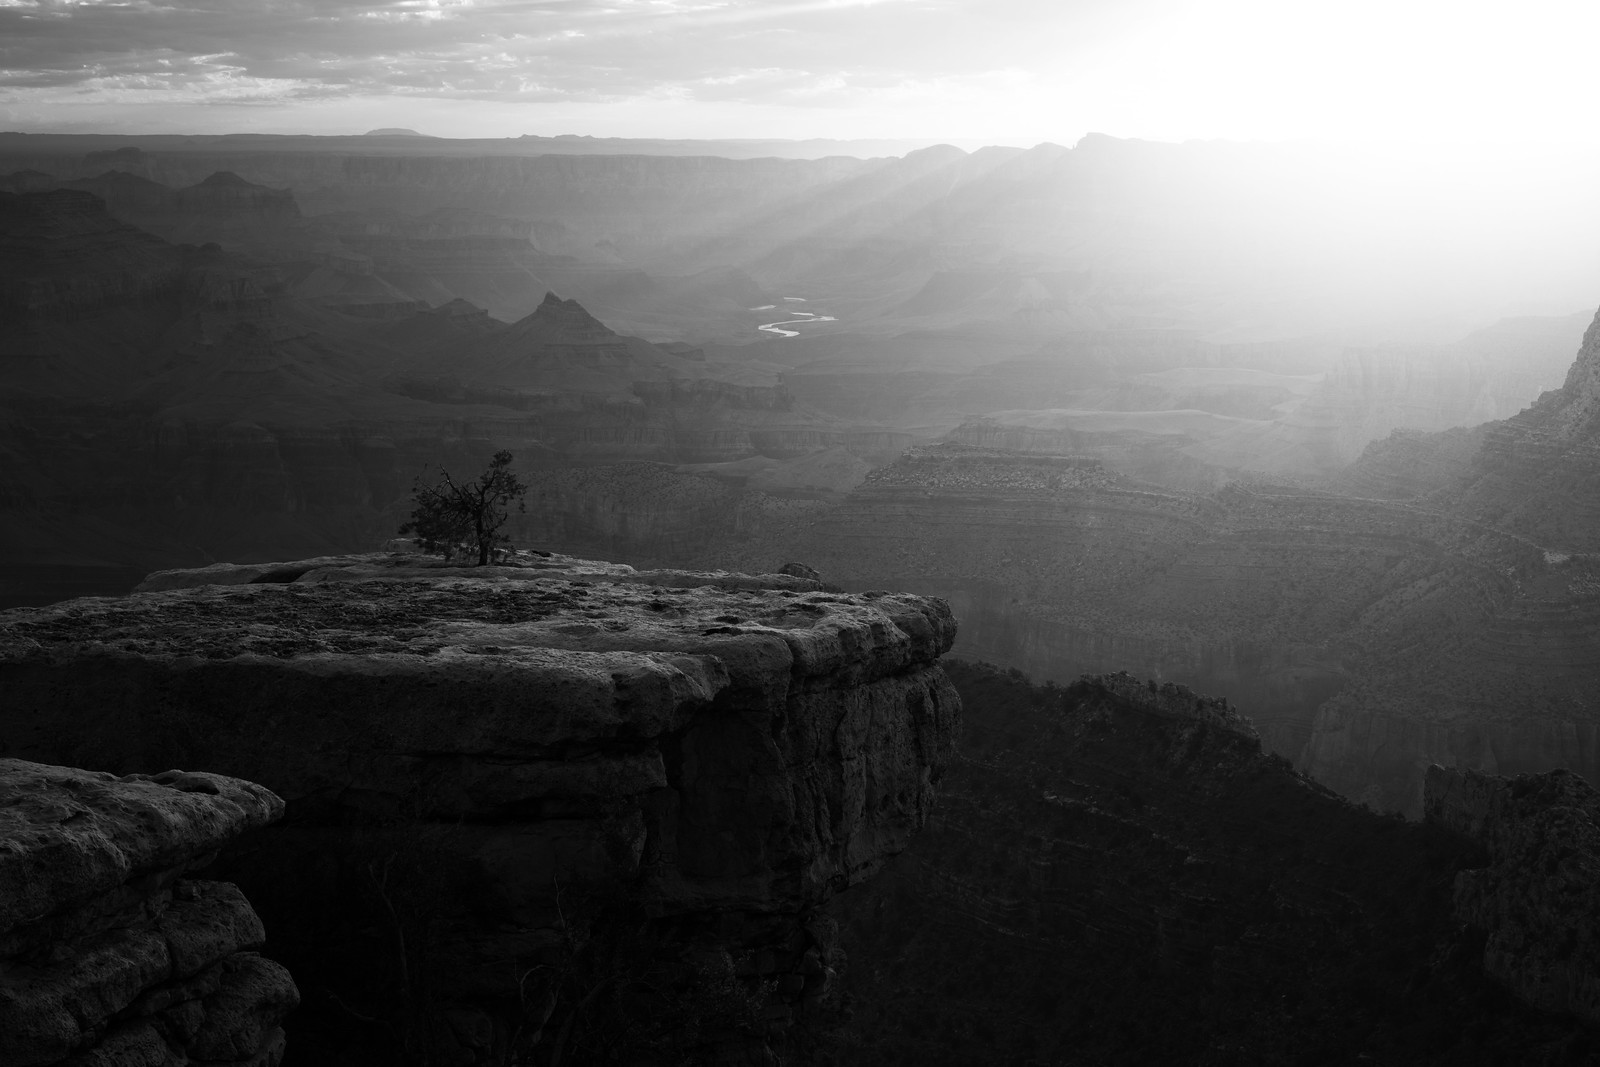 Grand Canyon at Sunrise by Alex Berger